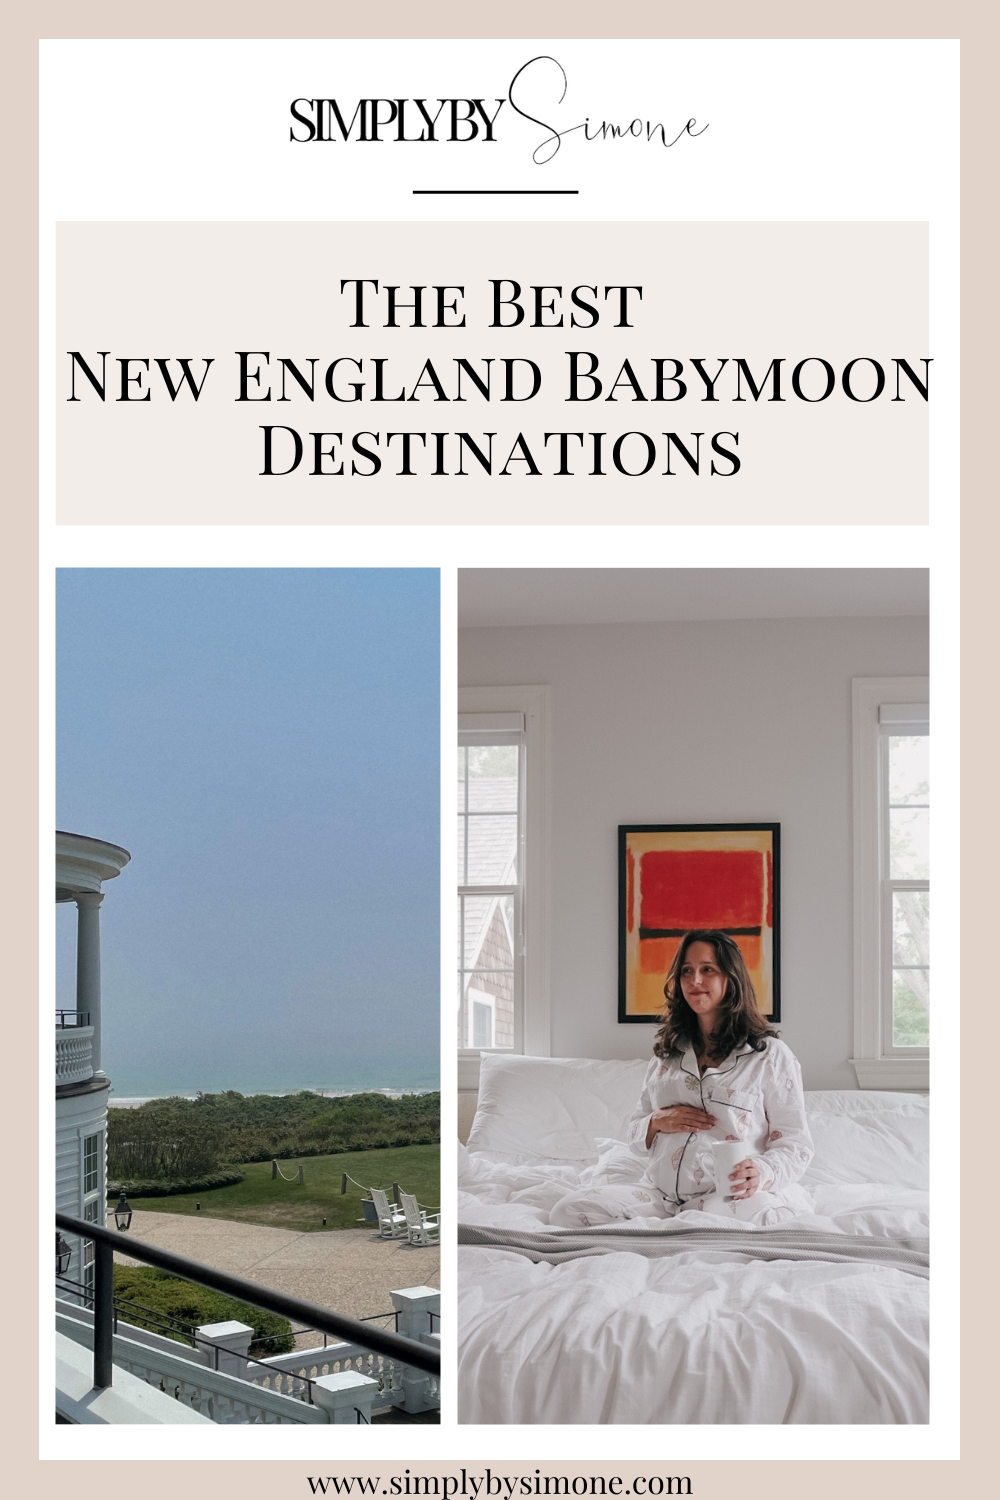 The Best New England Babymoon Destinations | Babymoon Ideas | North East Babymoon Destinations | North East Baby Moon Ideas | Babymoon Itinerary | Best babymoons in the North East | New England Travel | Babymoon Travel Guide | Relaxing Babymoon Ideas | Affordable babymoon destinations | Cover Image | Simply by Simone 